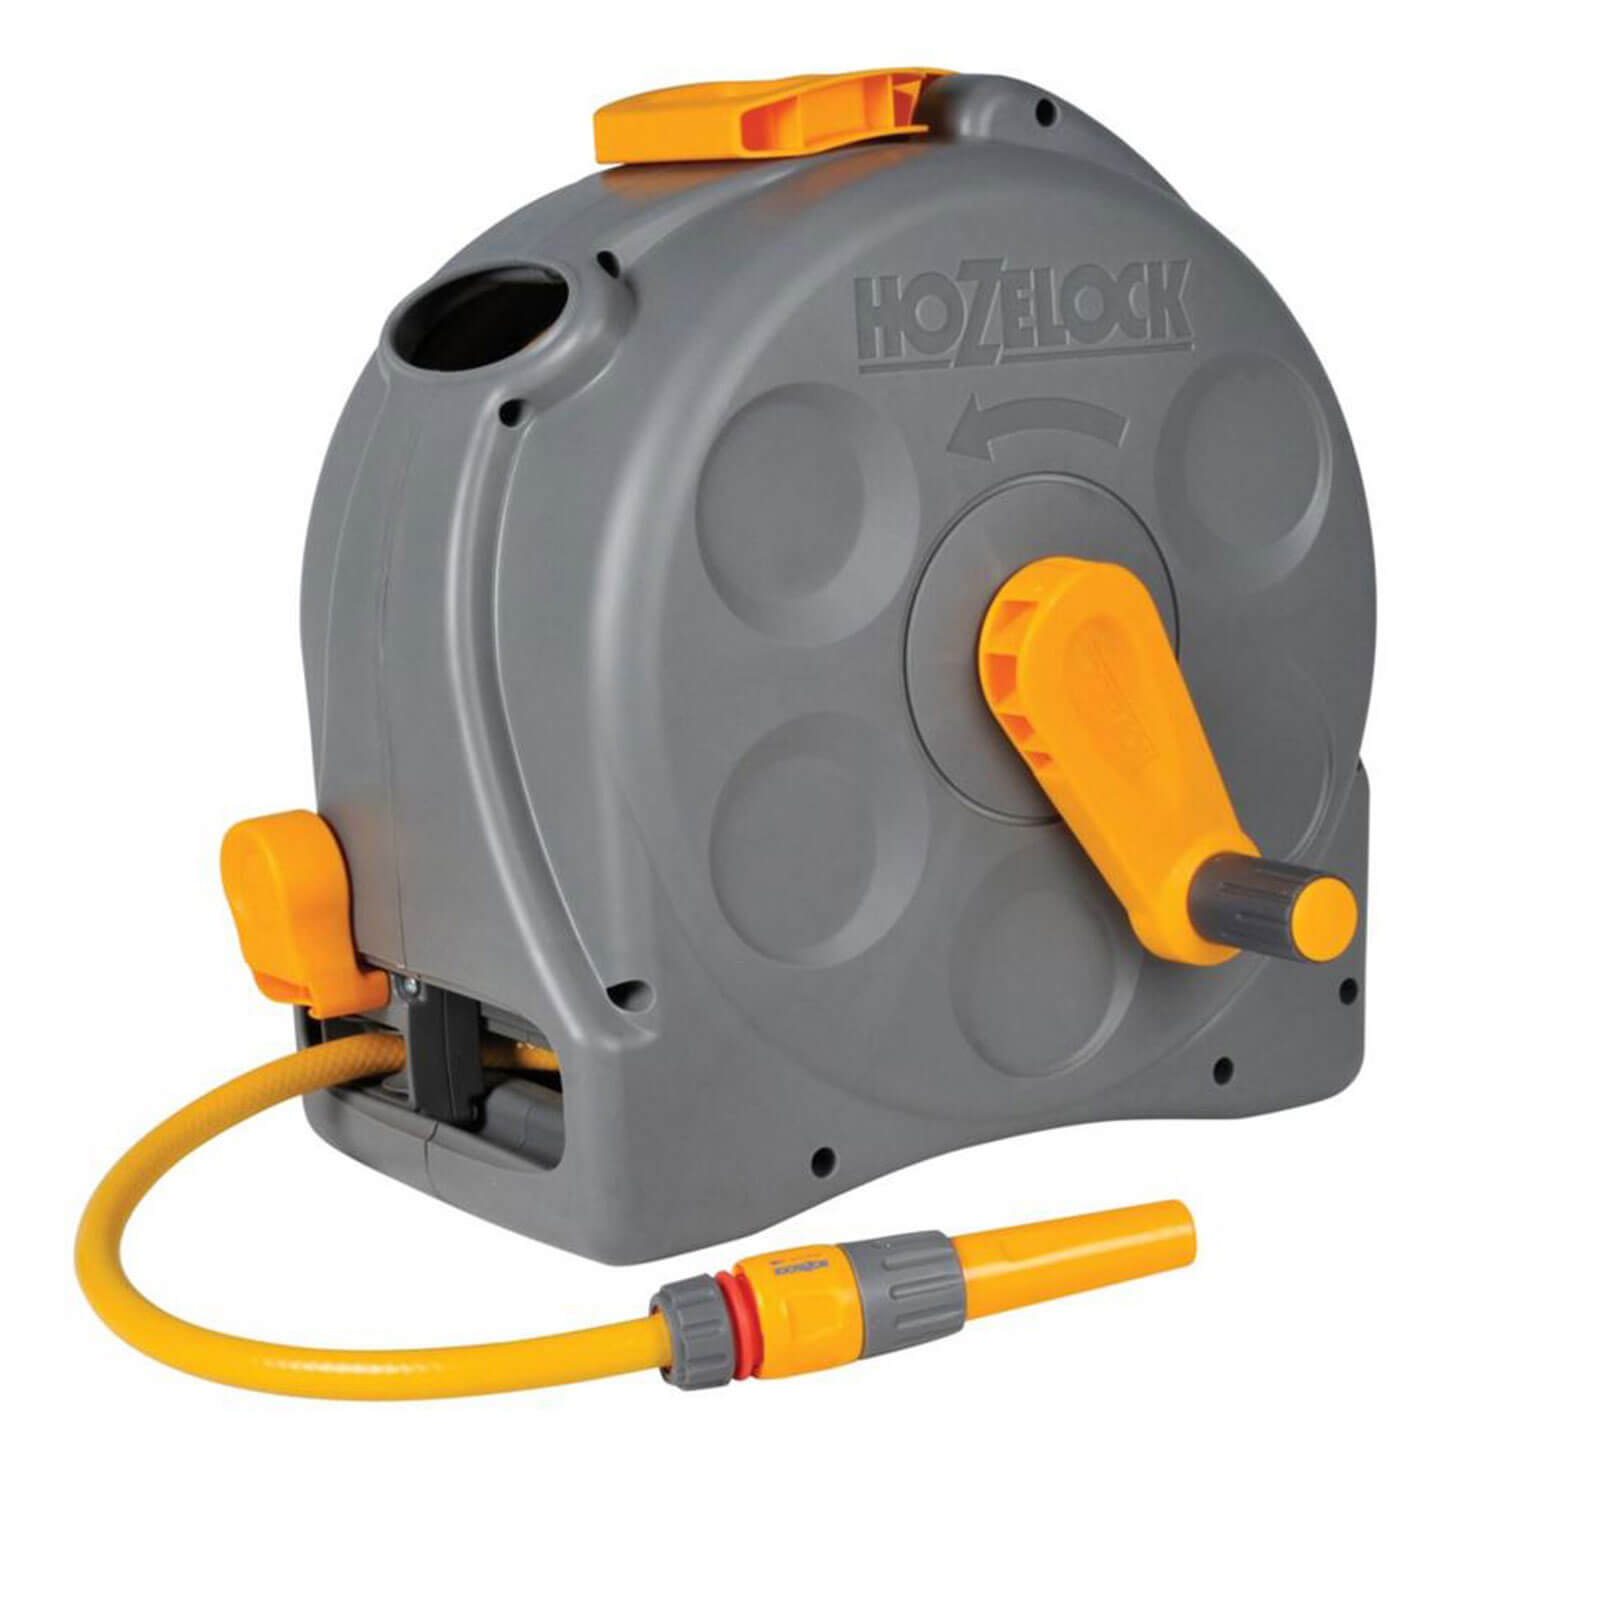 Hozelock Compact Enclosed Floor and Wall Mounted Hose Reel 1/2" / 12.5mm 25m Grey & Yellow